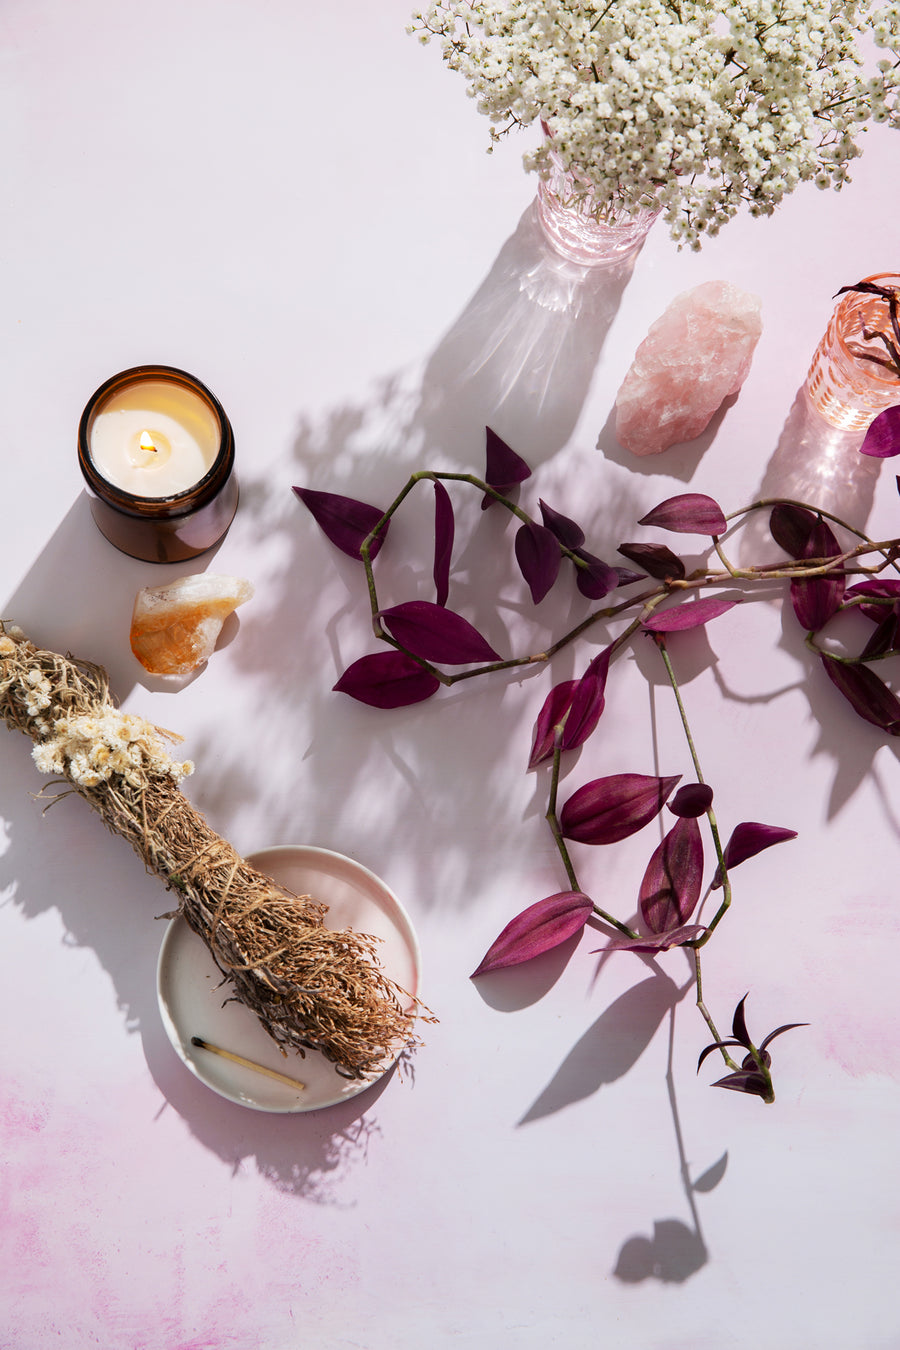 Betty Food and Product Photography Background with plants, a candle, crystals and  smudge stick